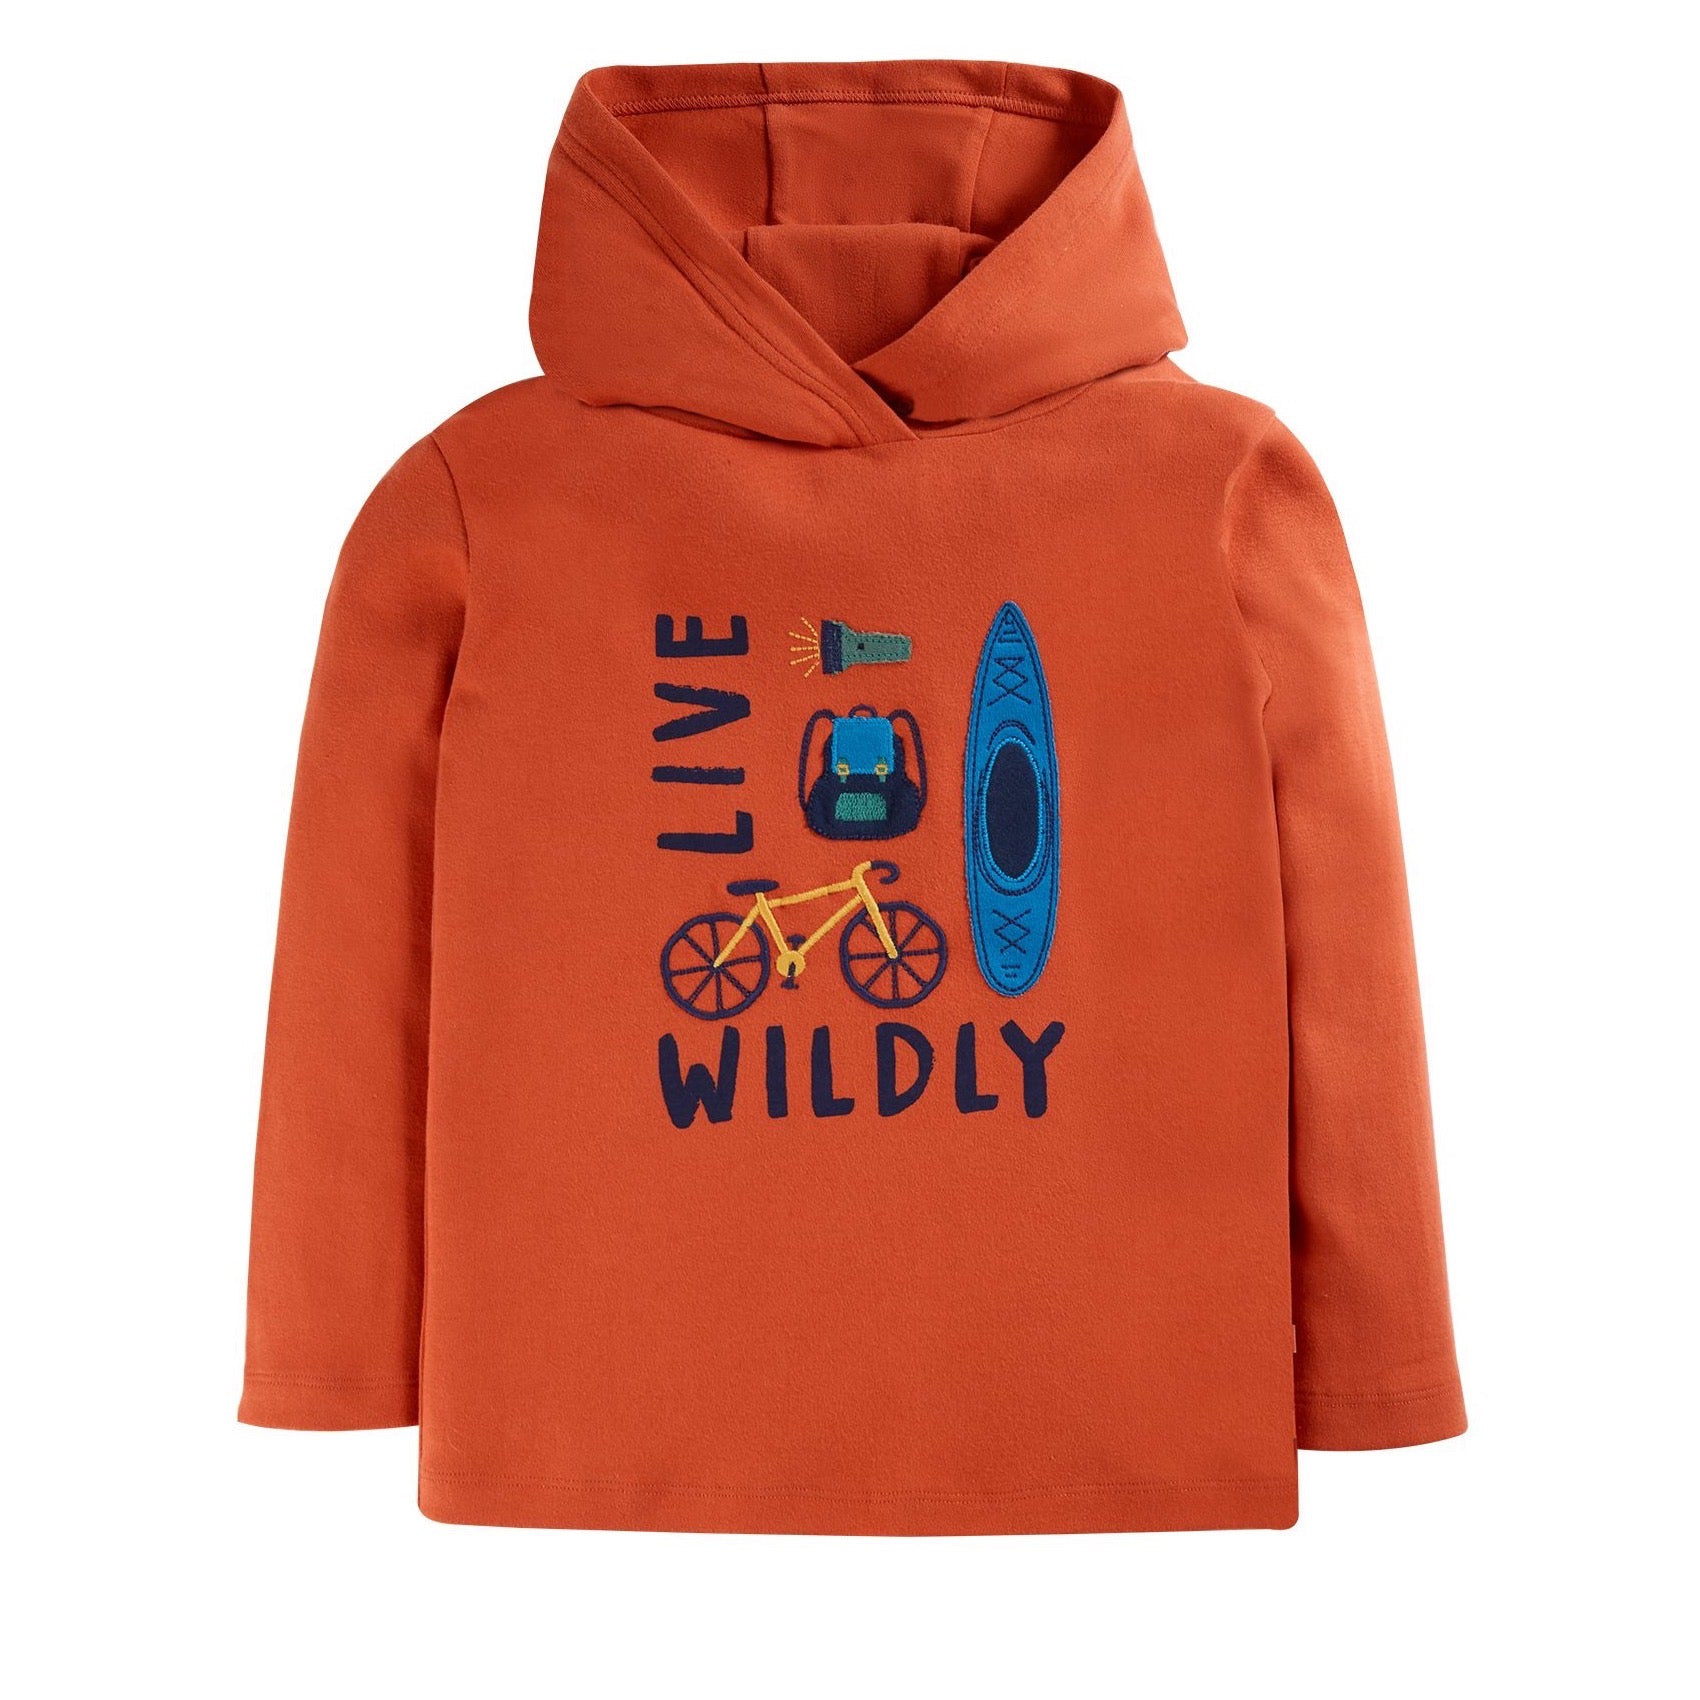 Frugi Campfire Hooded Top Live Wildly Clothing 4-5YRS / Orange,5-6YRS / Orange,6-7YRS / Orange,7-8YRS / Orange,8-9YRS / Orange